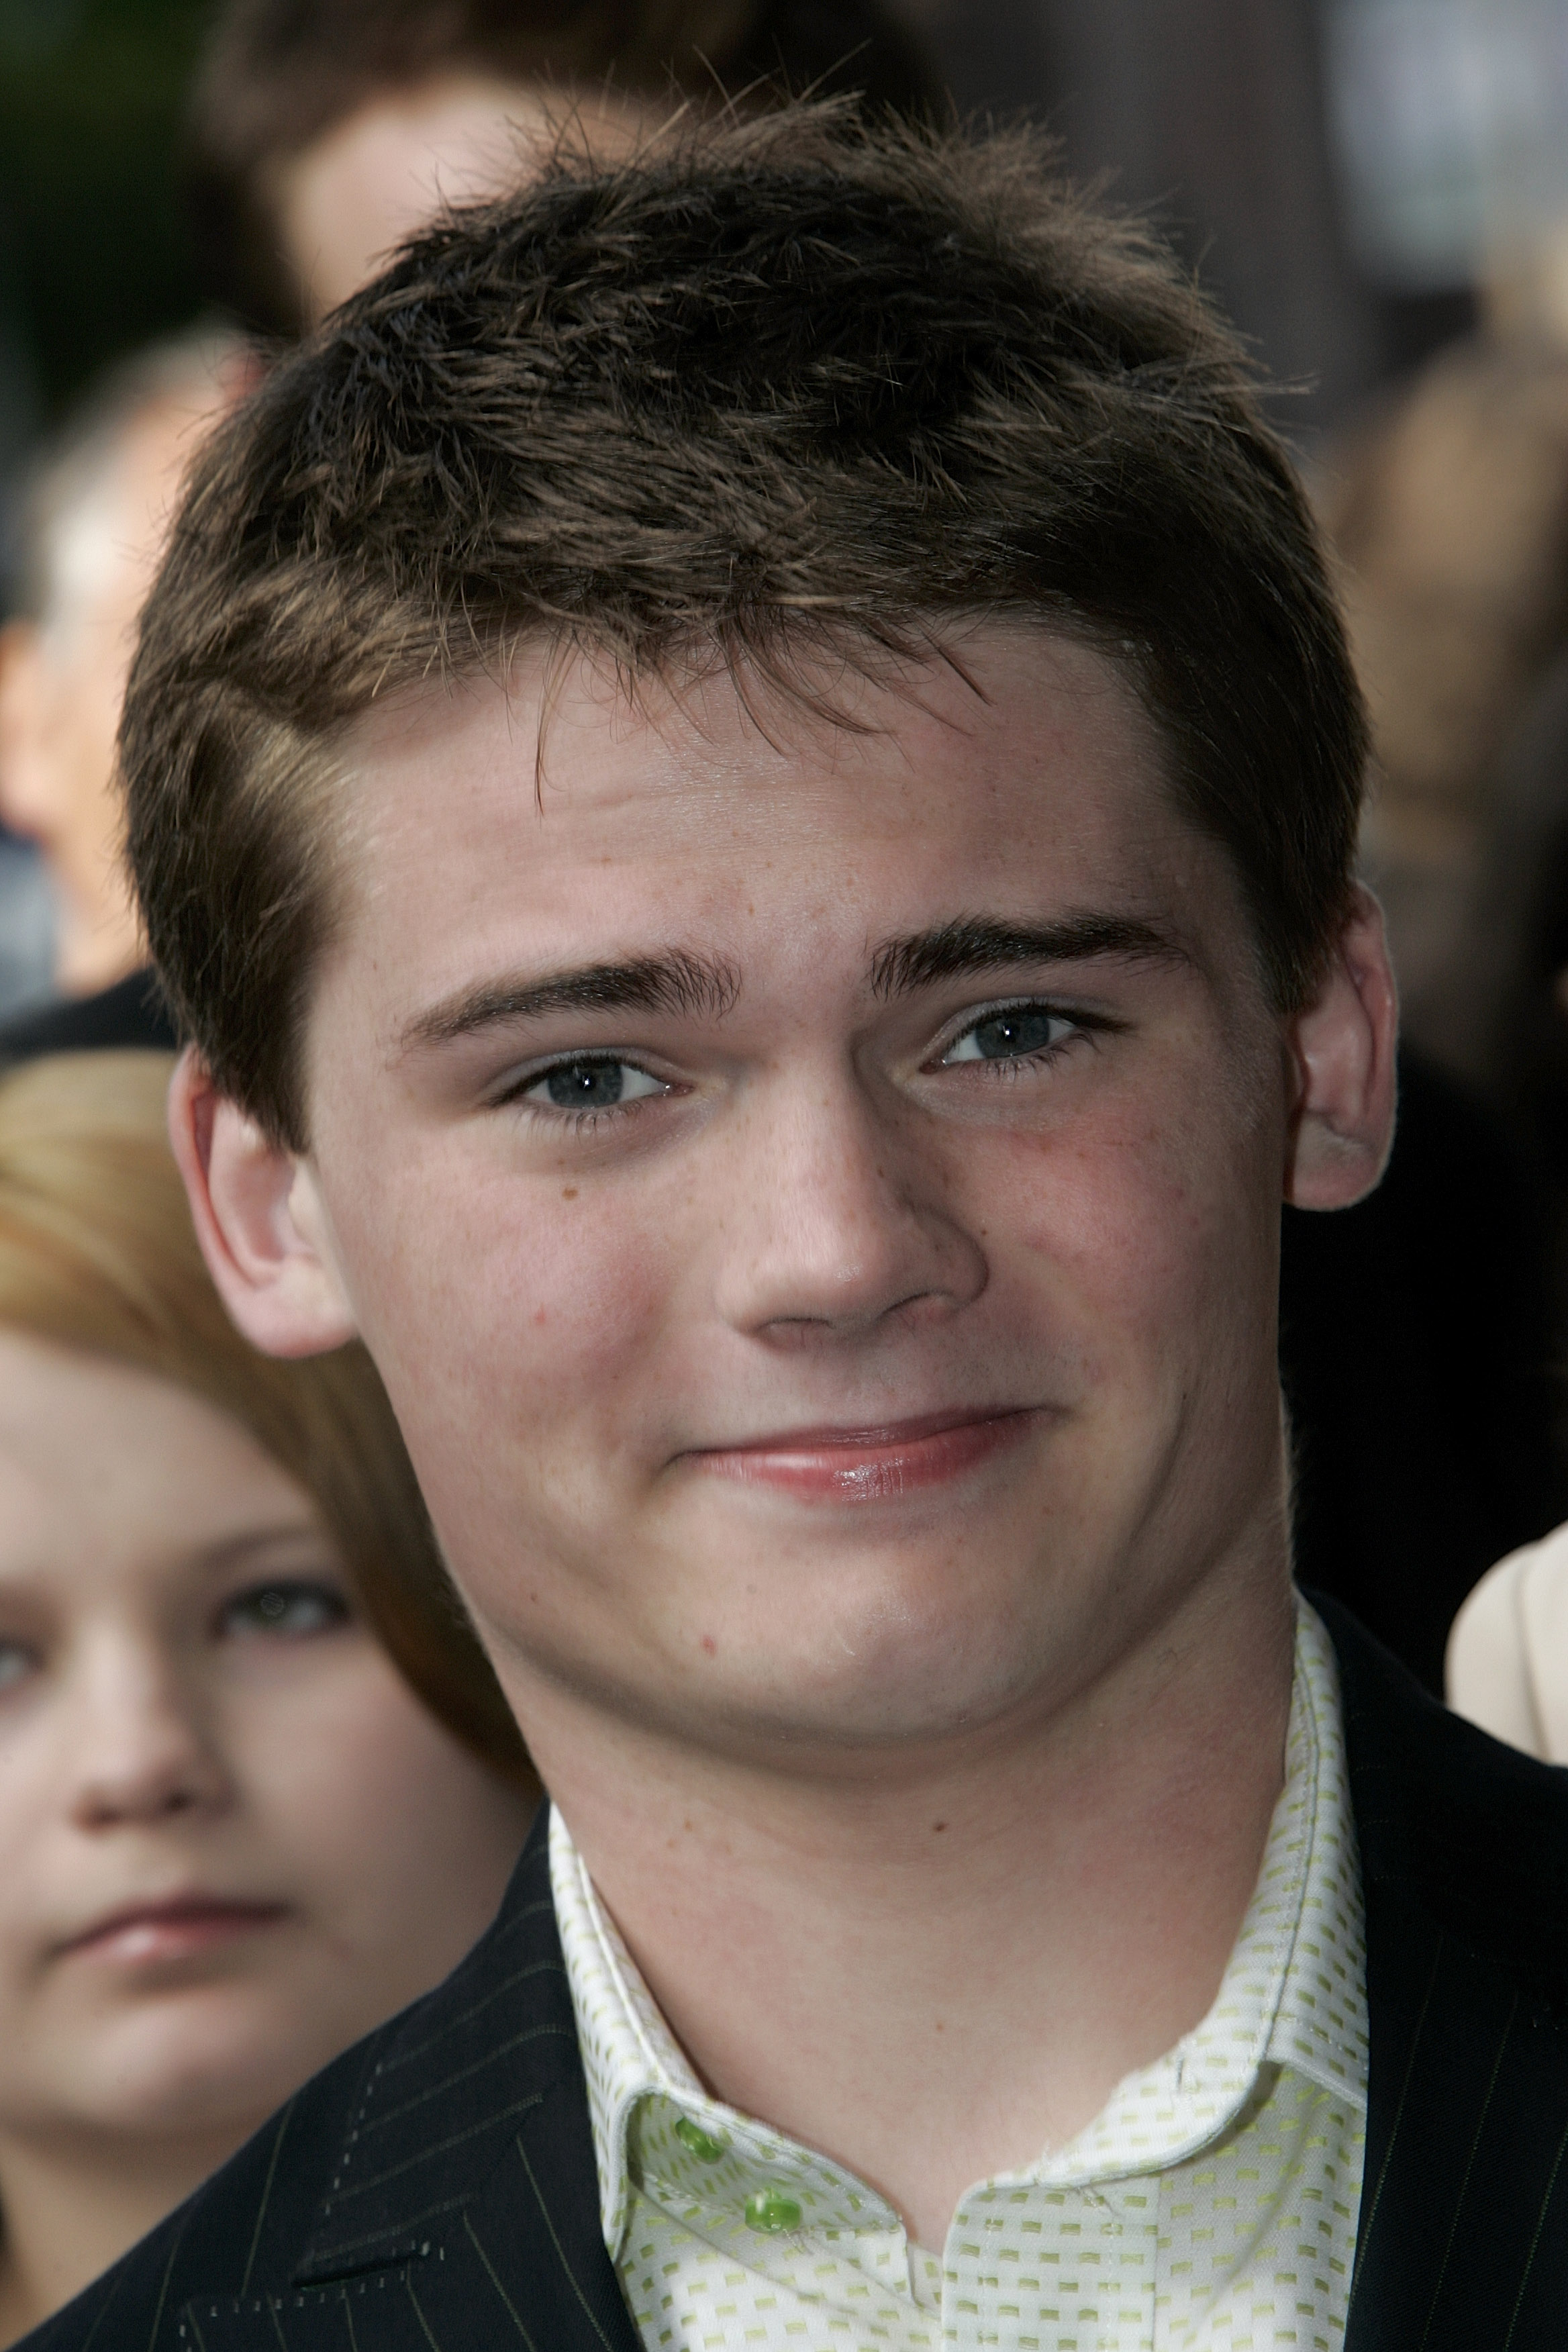 Jake Lloyd on May 12, 2005, in San Francisco, California. | Source: Getty Images